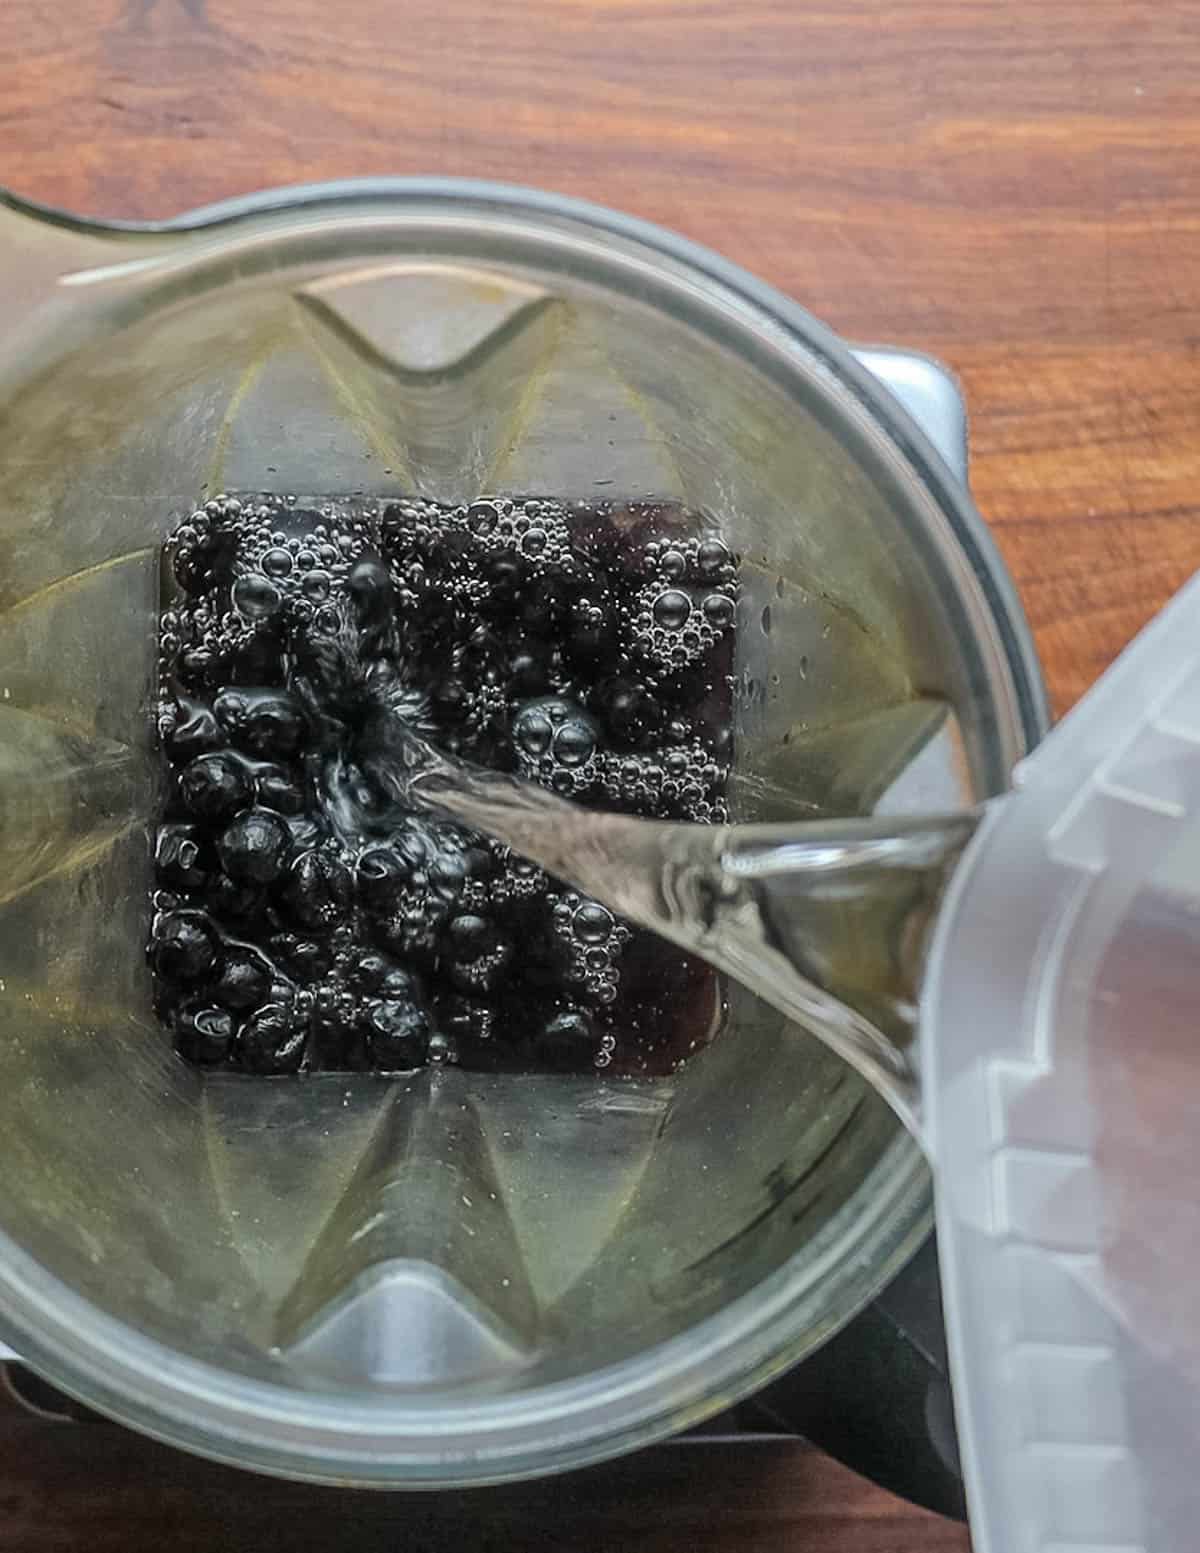 Adding water to black chokeberries in a blender. 